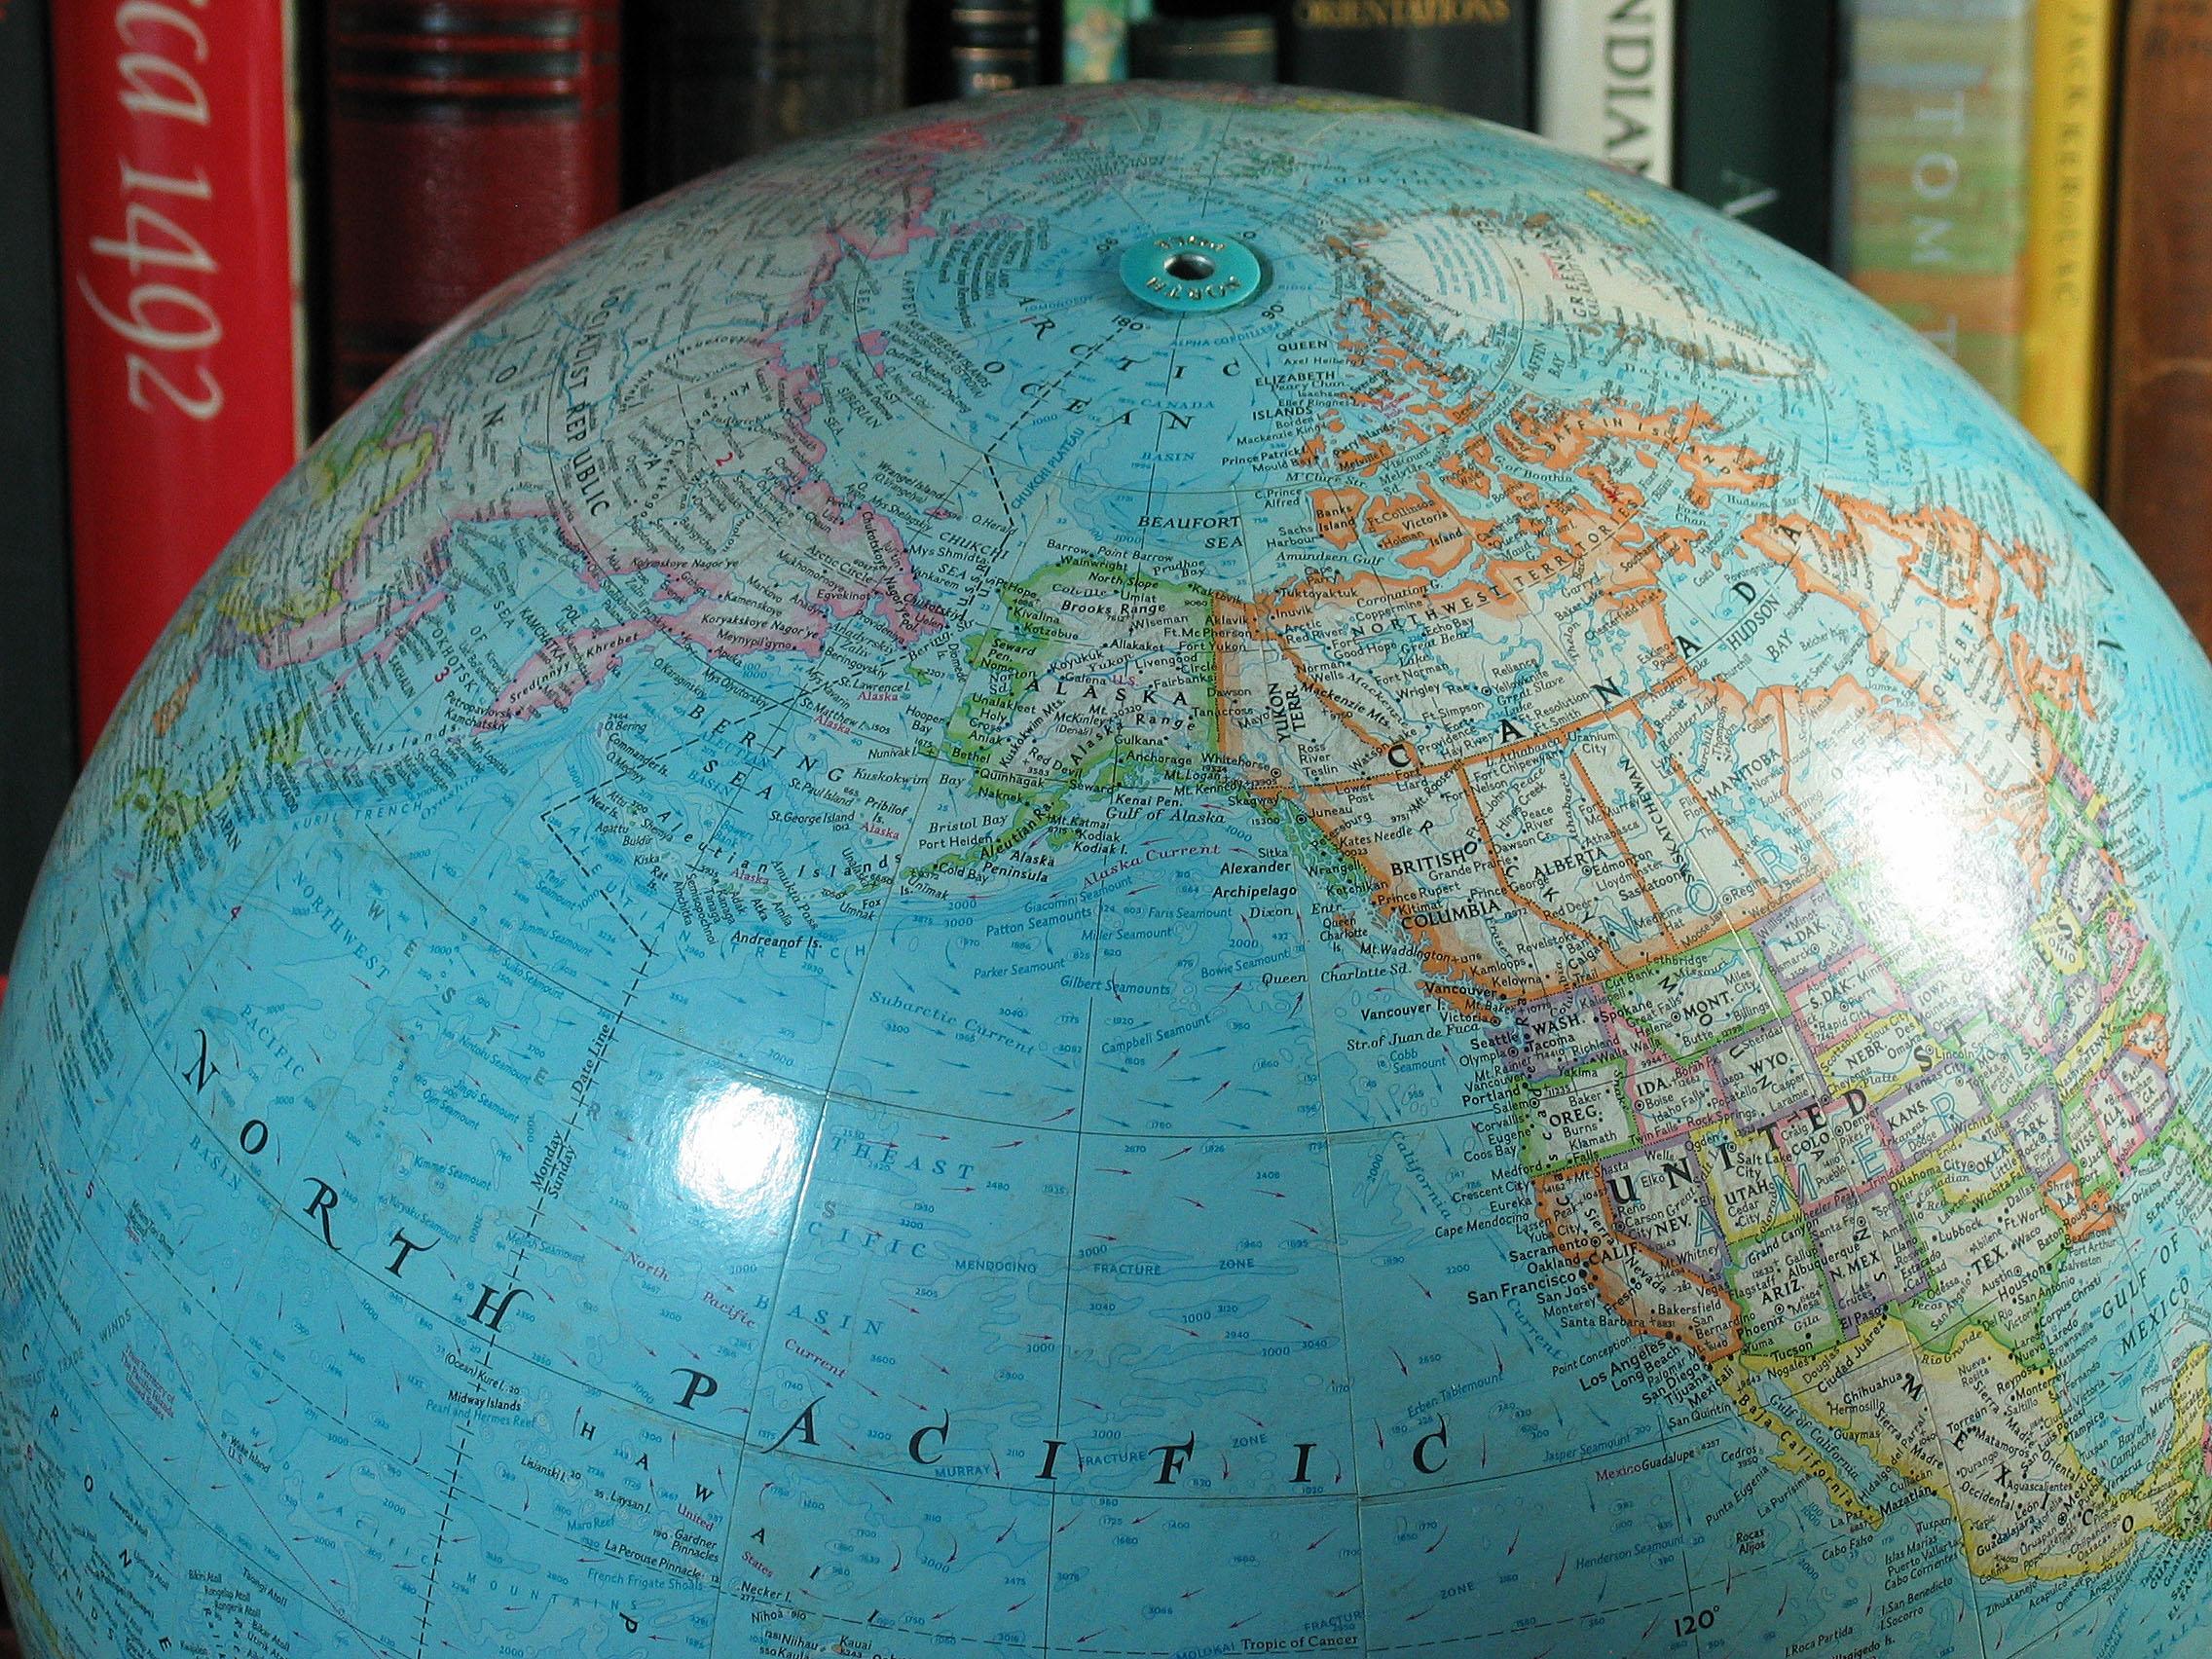 16-Inch Terrestrial Globe 1986 National Geographic In Good Condition For Sale In Ottawa, Ontario